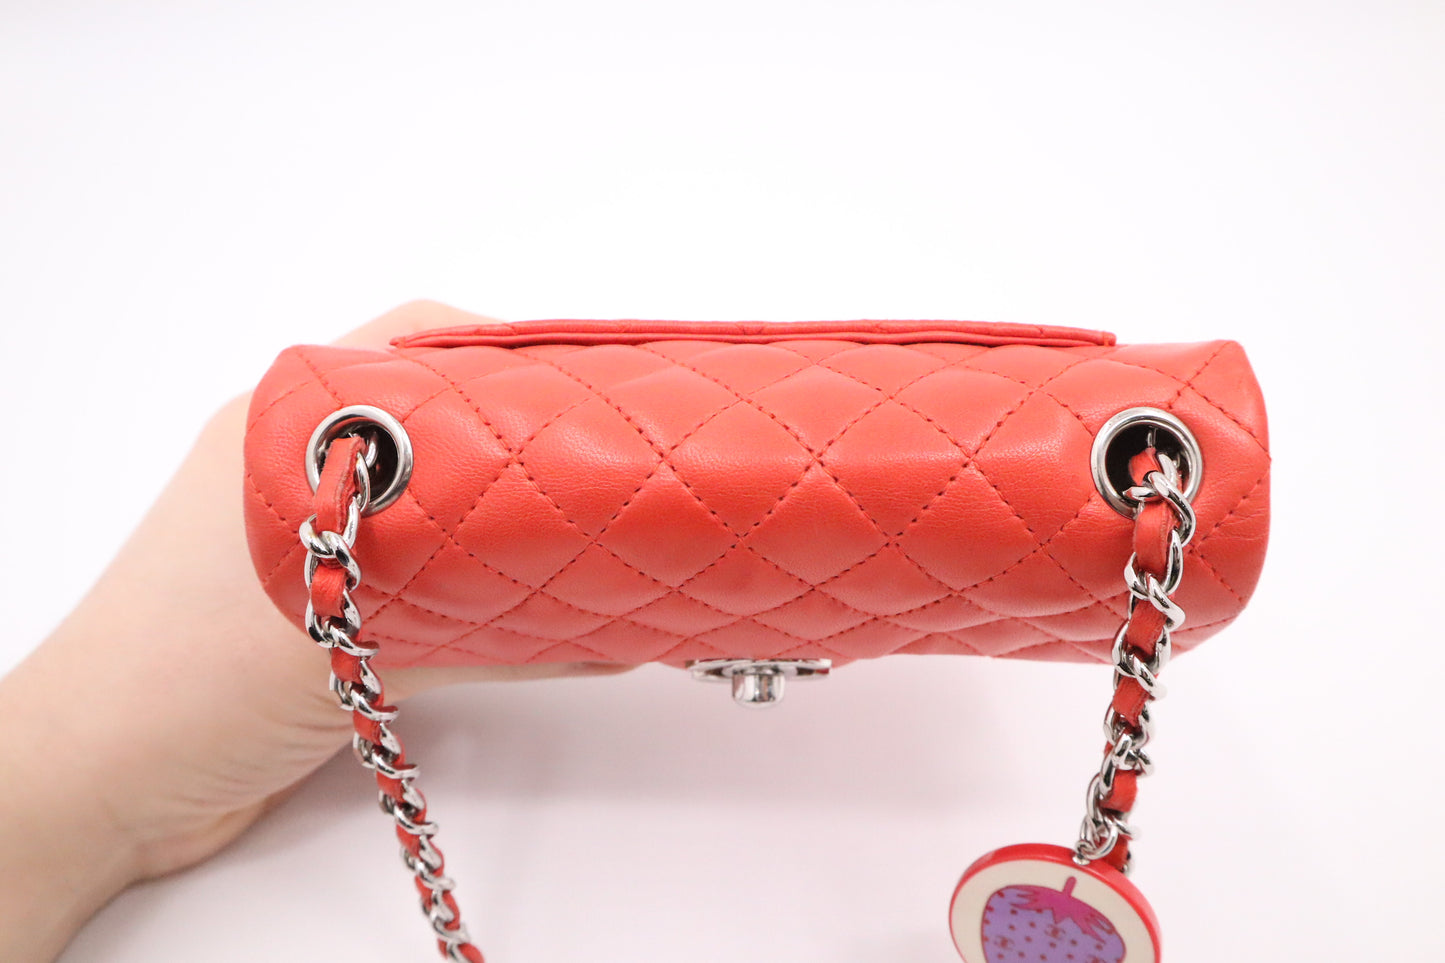 Chanel Ladybug Mini Flap in Coral Leather